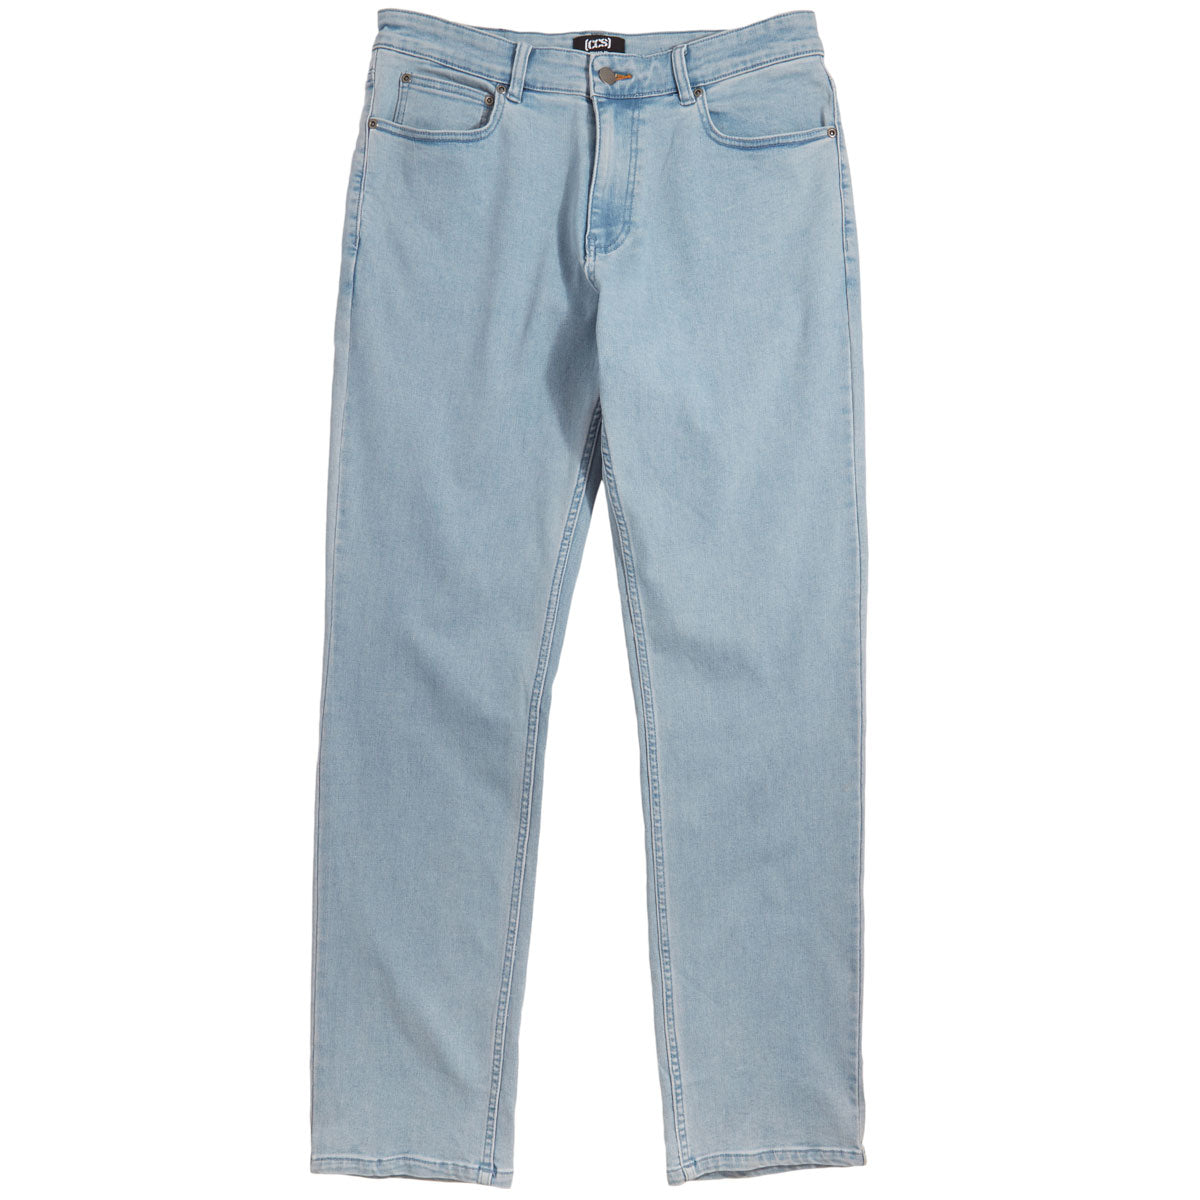 CCS Standard Plus Relaxed Denim Jeans - New Wash image 6